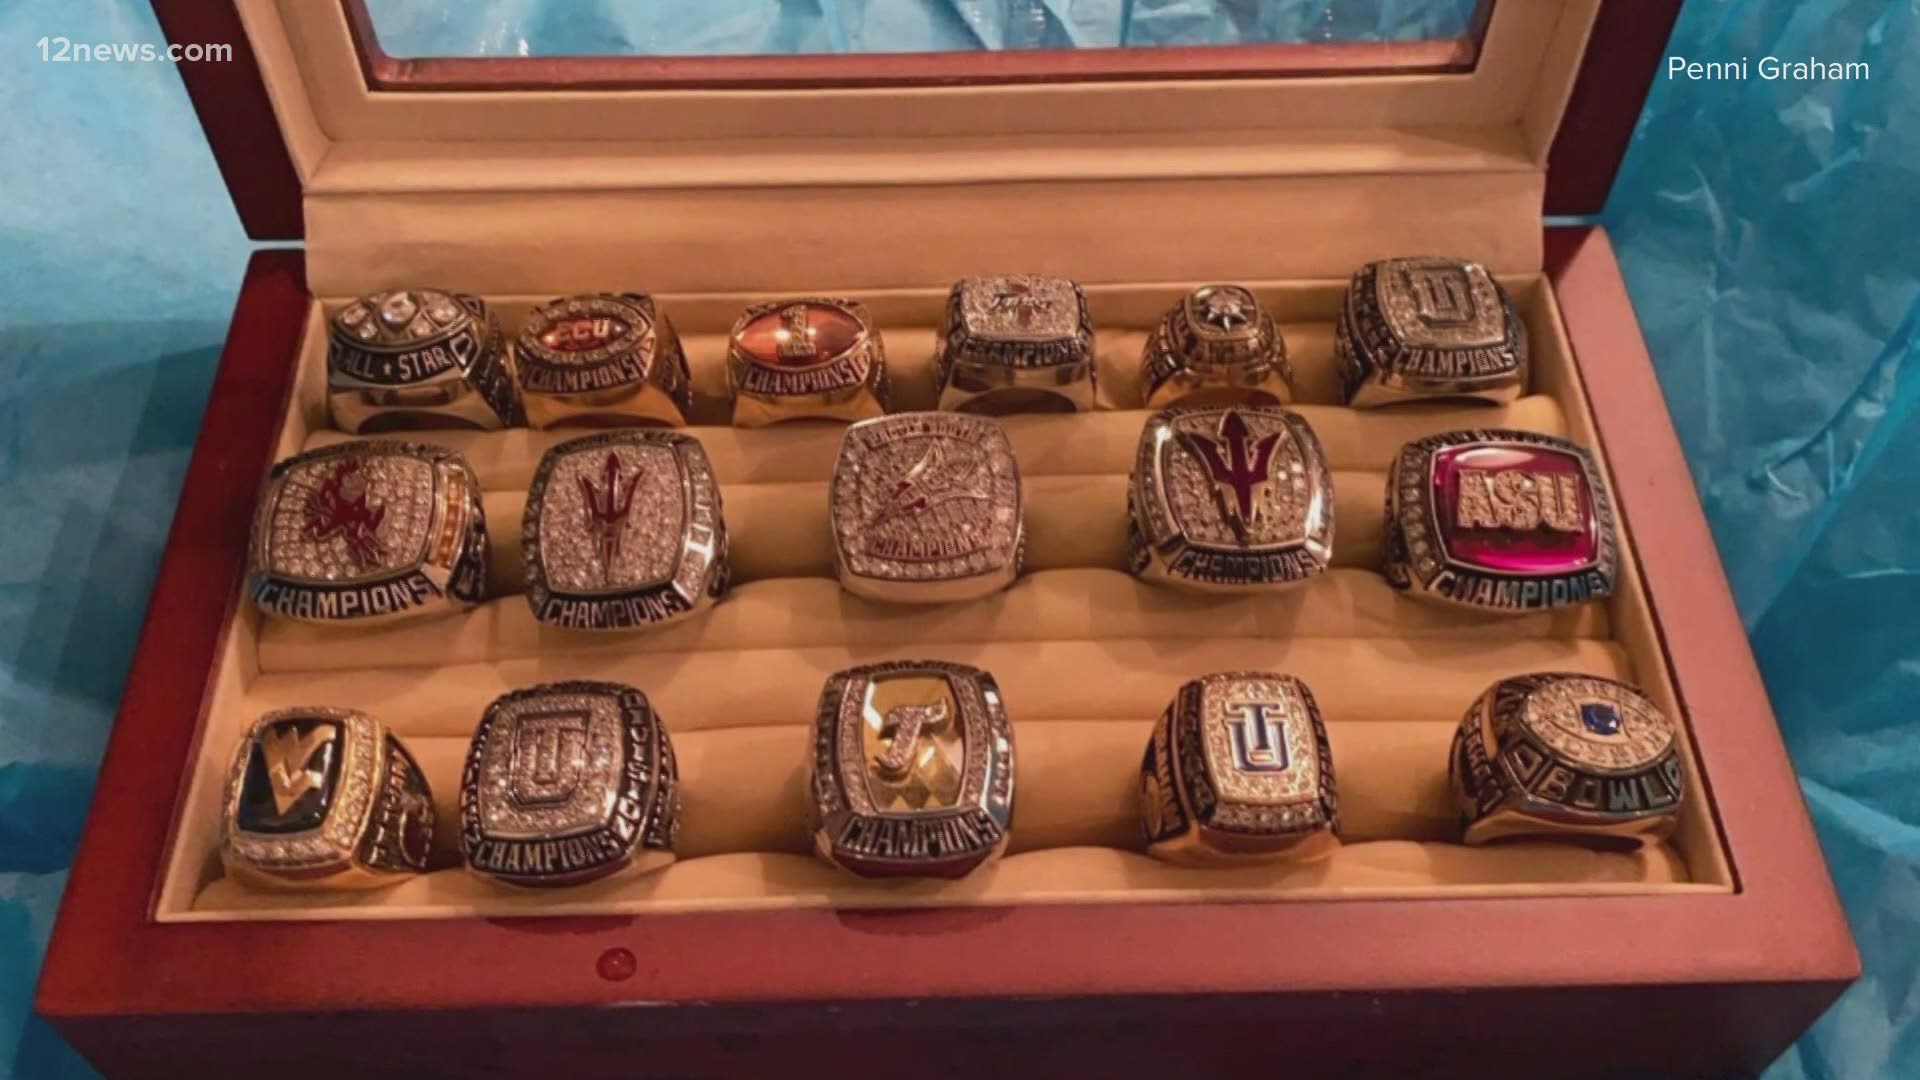 Todd Graham, a 5-year coach for ASU football, had 17 championship rings stolen on Thursday. Now, his wife is pleading for the thief to return them.